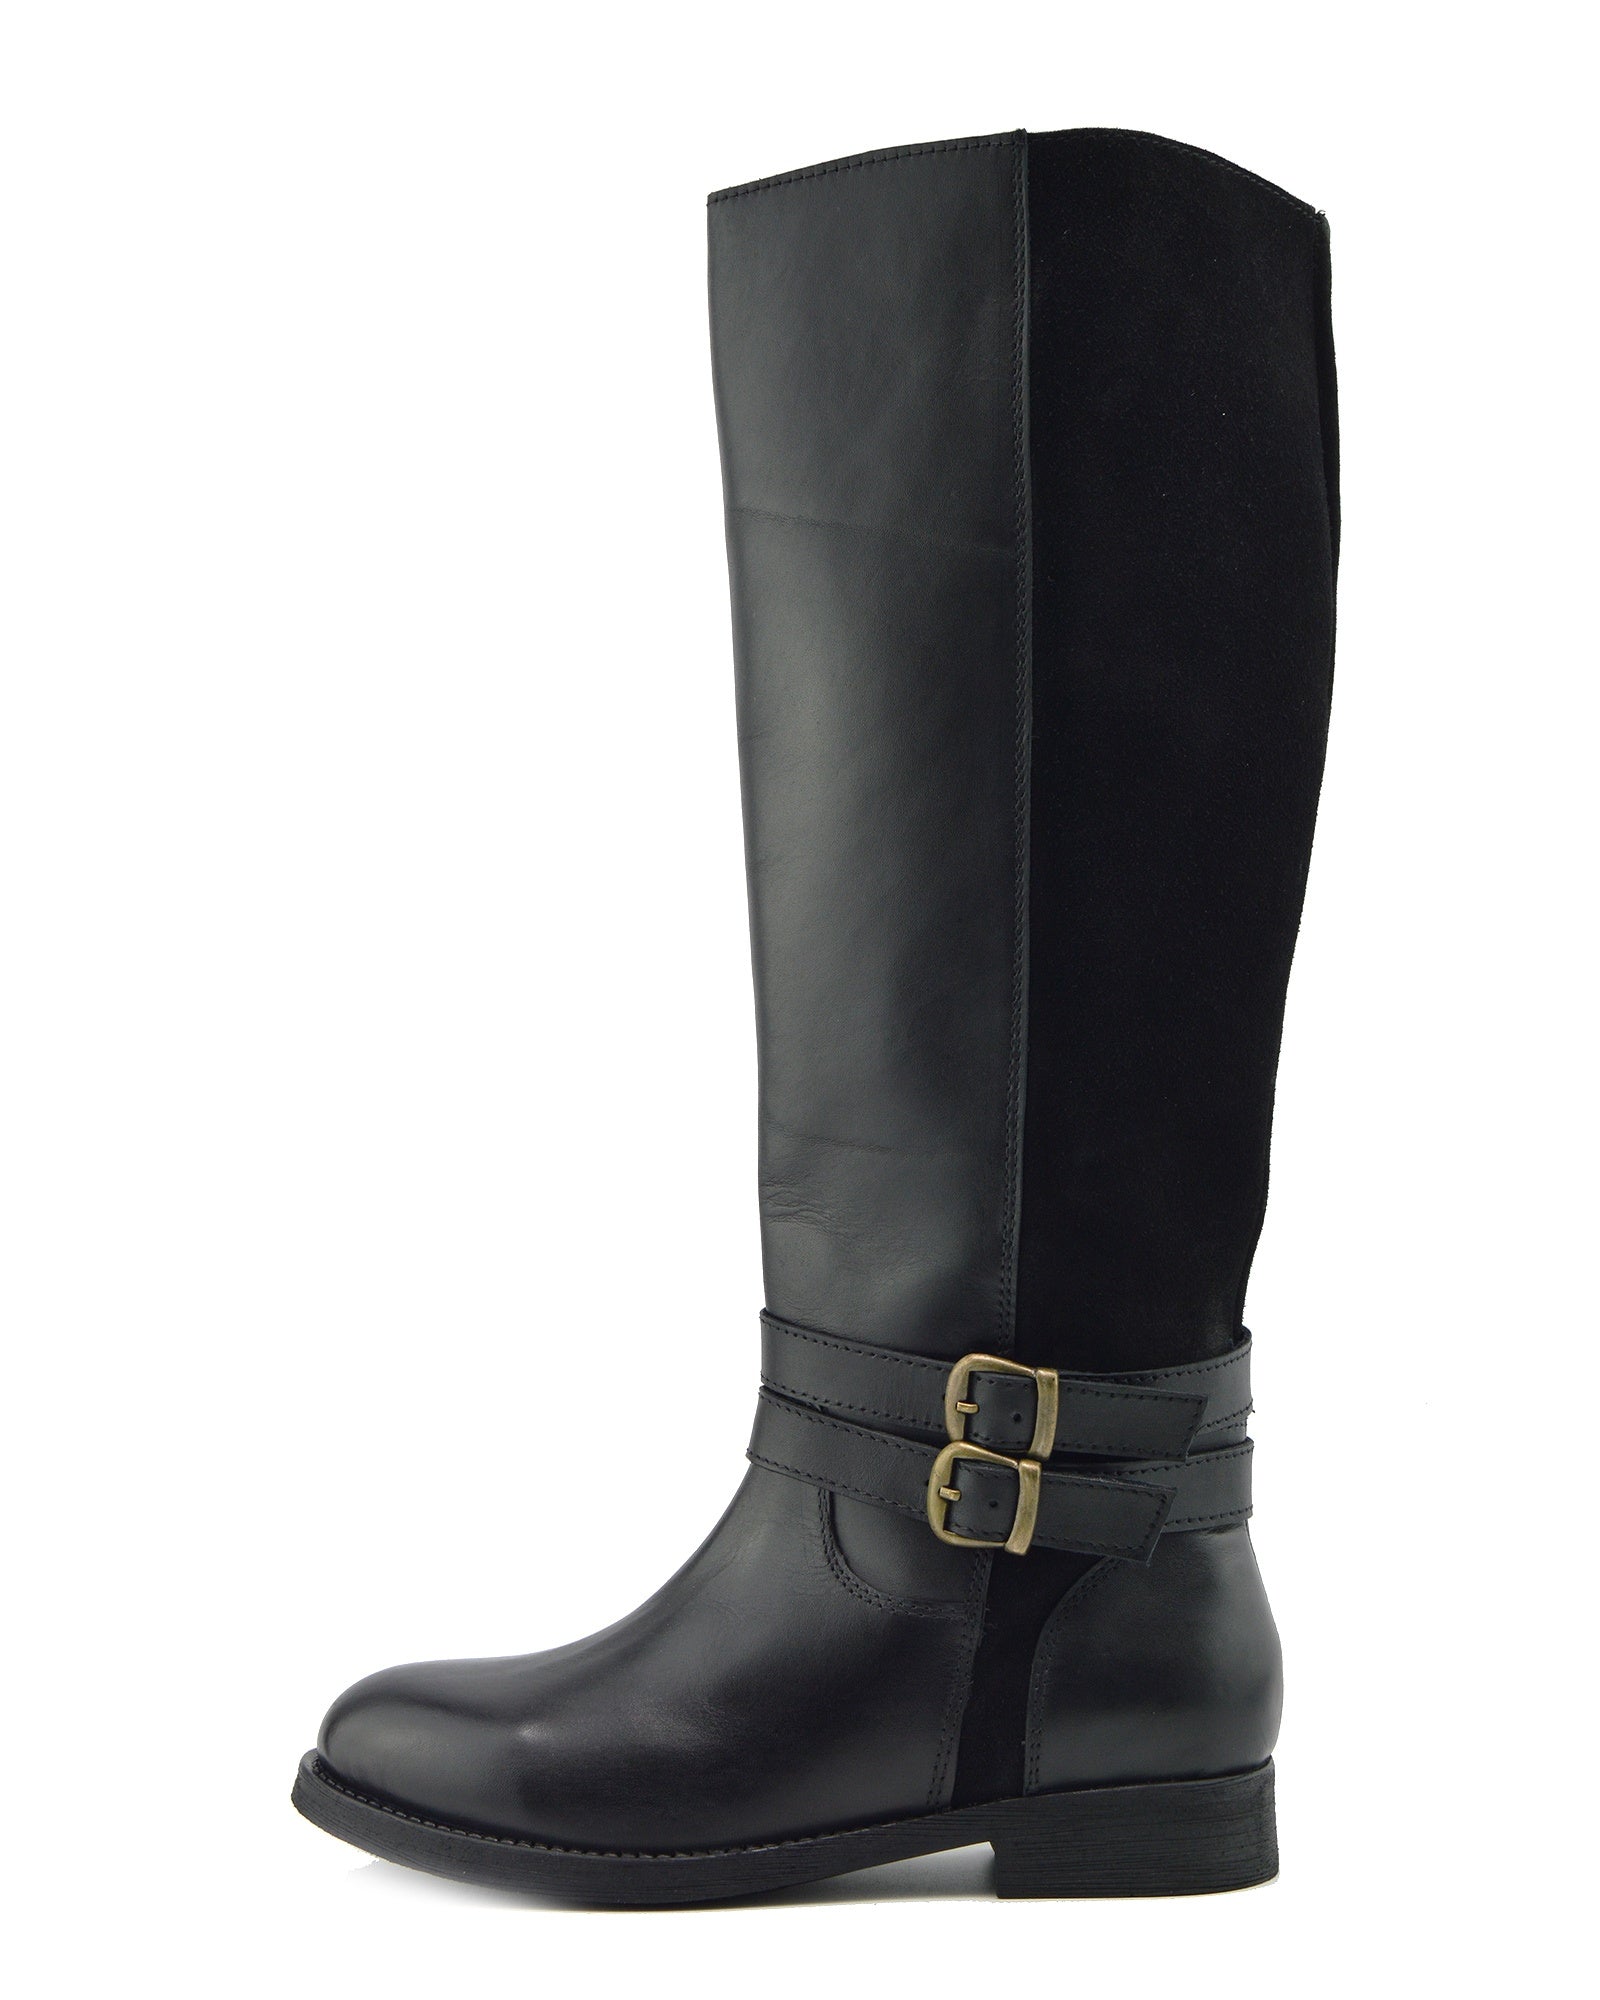 Tilly Leather Knee-High Riding Boots Elastic Wide Calf Boots - Black ...